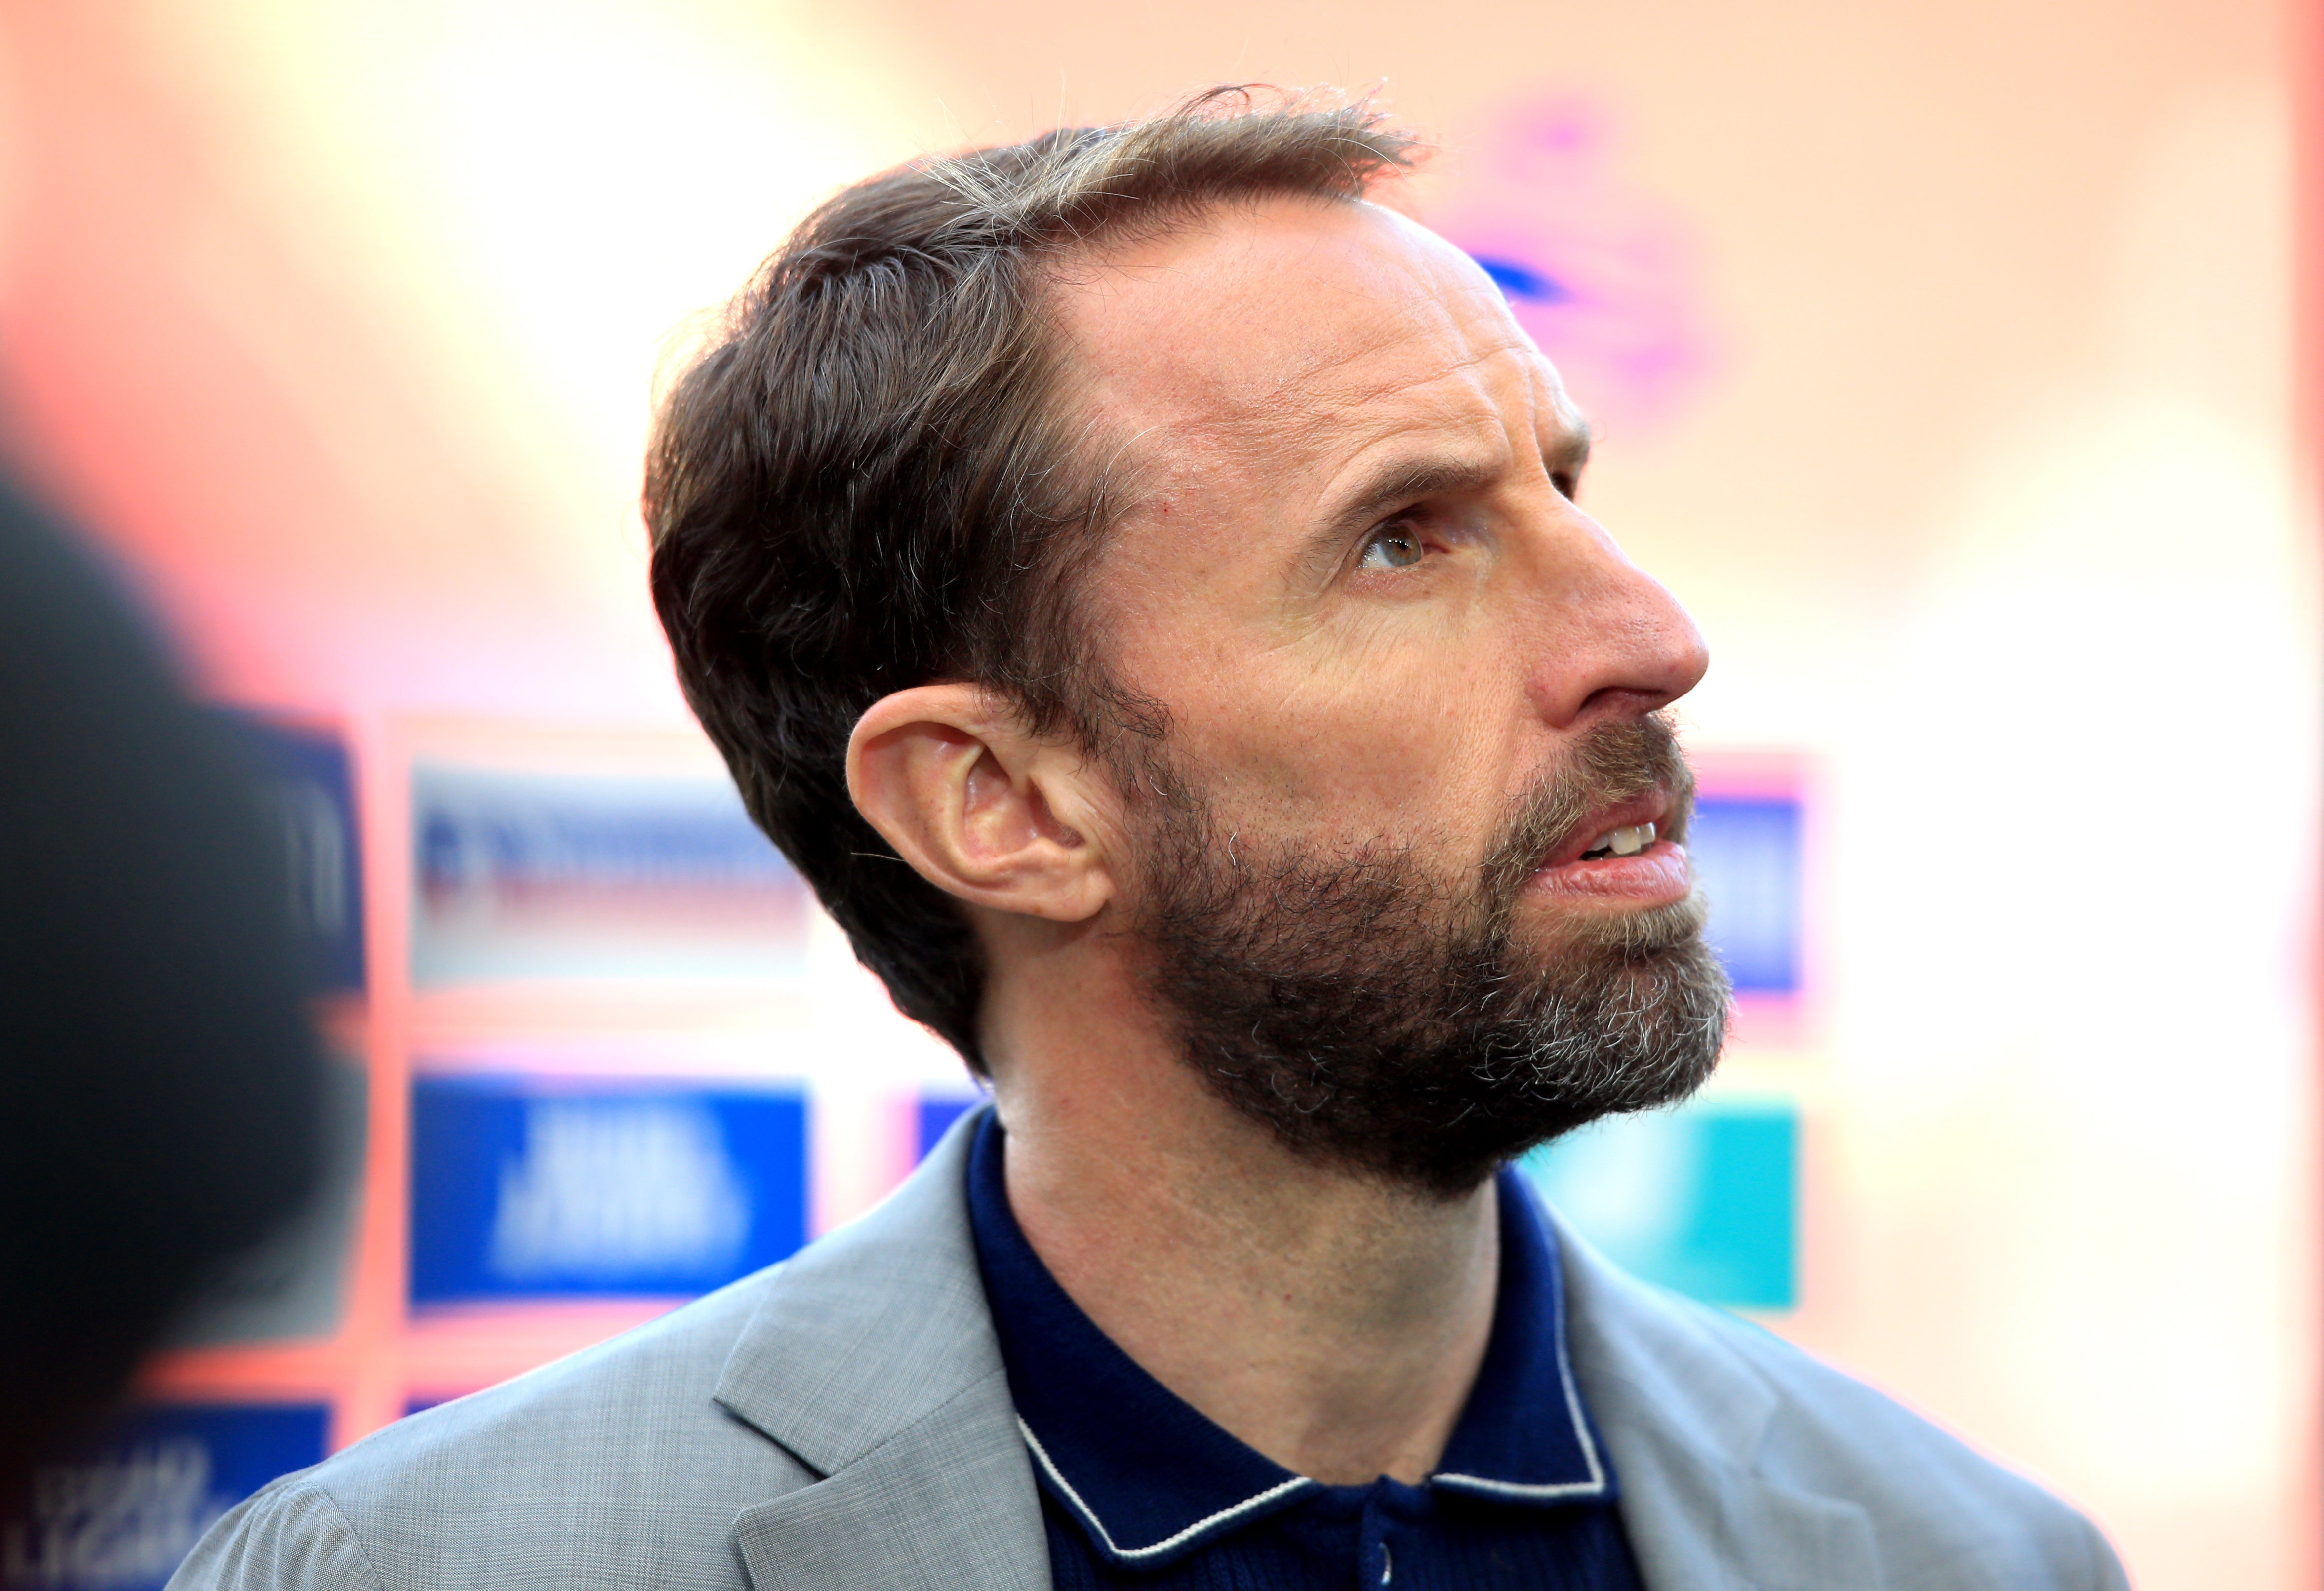 England manager Gareth Southgate was unhappy with the jeering on the taking of the knee before victory over Austria